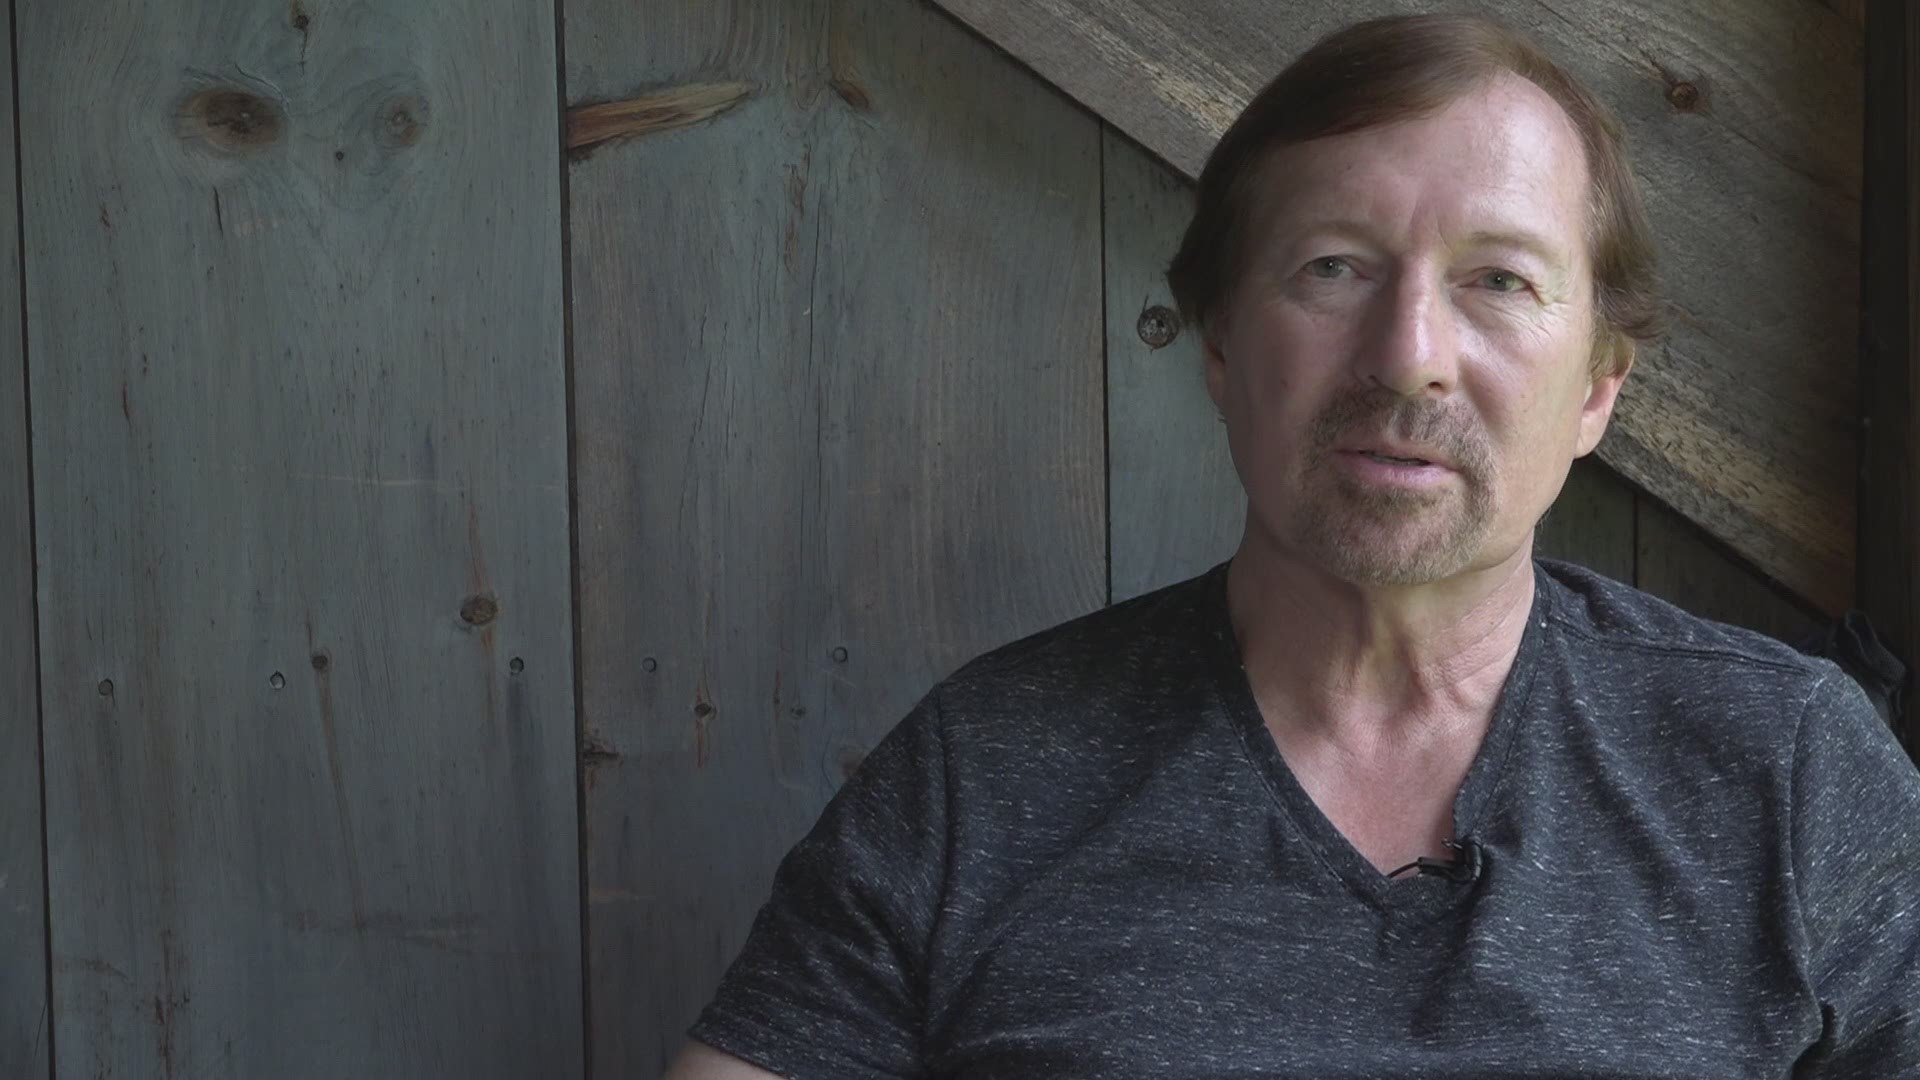 Paranormal investigator and demonologist Carl Johnson talks about the paranormal activity he says he experienced firsthand during the 1973 investigation into "The Conjuring" house. He is now working with the Heinzen's with their latest investigation.